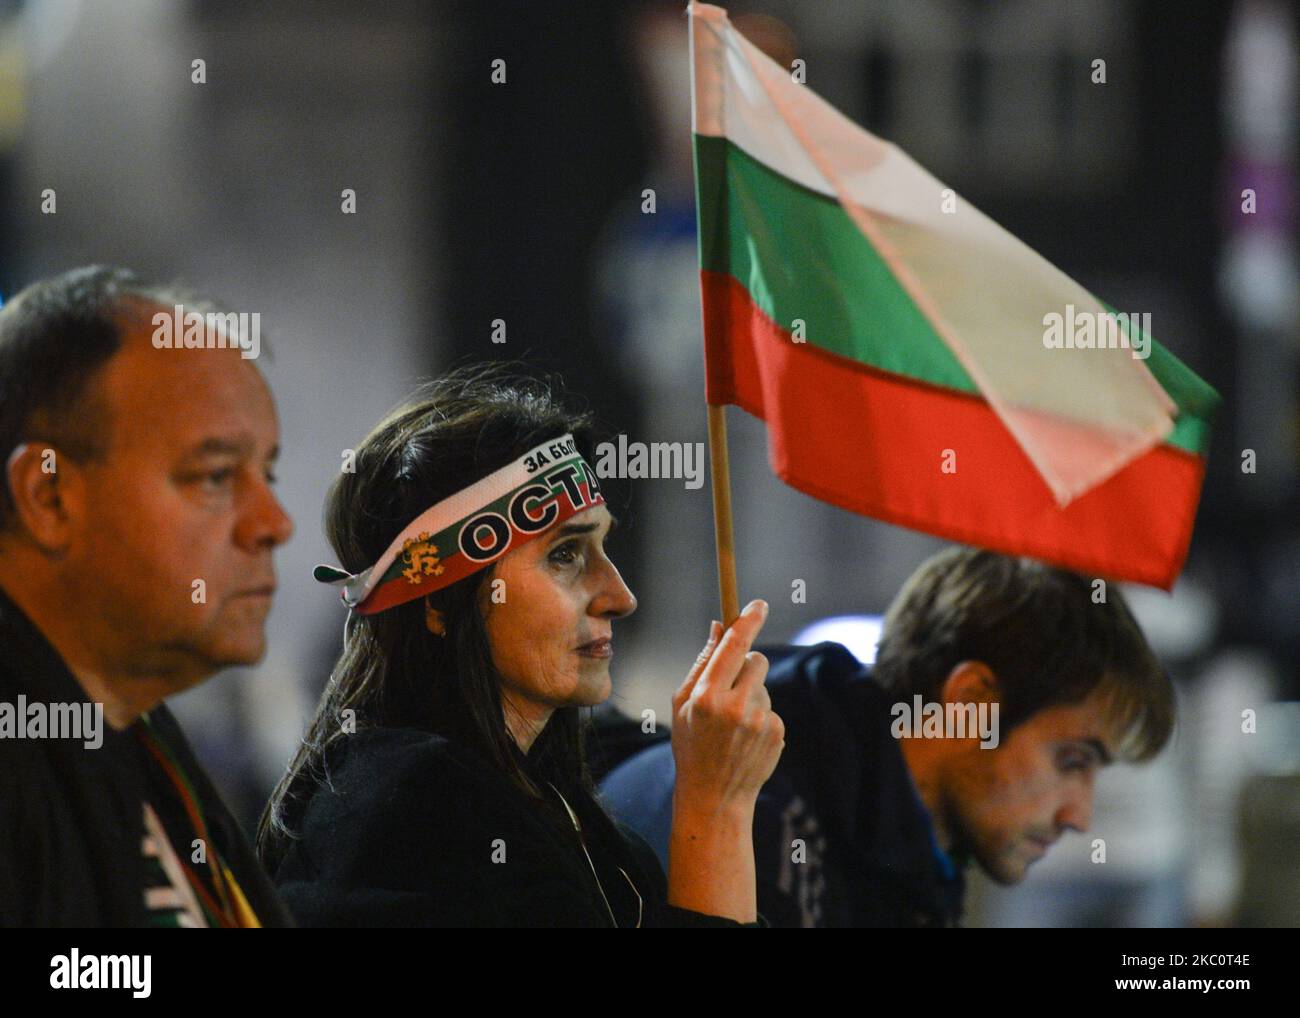 A protester holds a Bulgarian national flag on the 82nd day of anti-government protest on in Sofia, in the Triangle of Power (the space between the buildings of the Presidency, the National Assembly and the Council of Ministers). For nearly three months people have been taking part in daily protests against corruption, demanding the resignation of the government of Boyko Borissov, in power since 2009. On Monday, September 28, 2020, in Sofia, Bulgaria. (Photo by Artur Widak/NurPhoto) Stock Photo